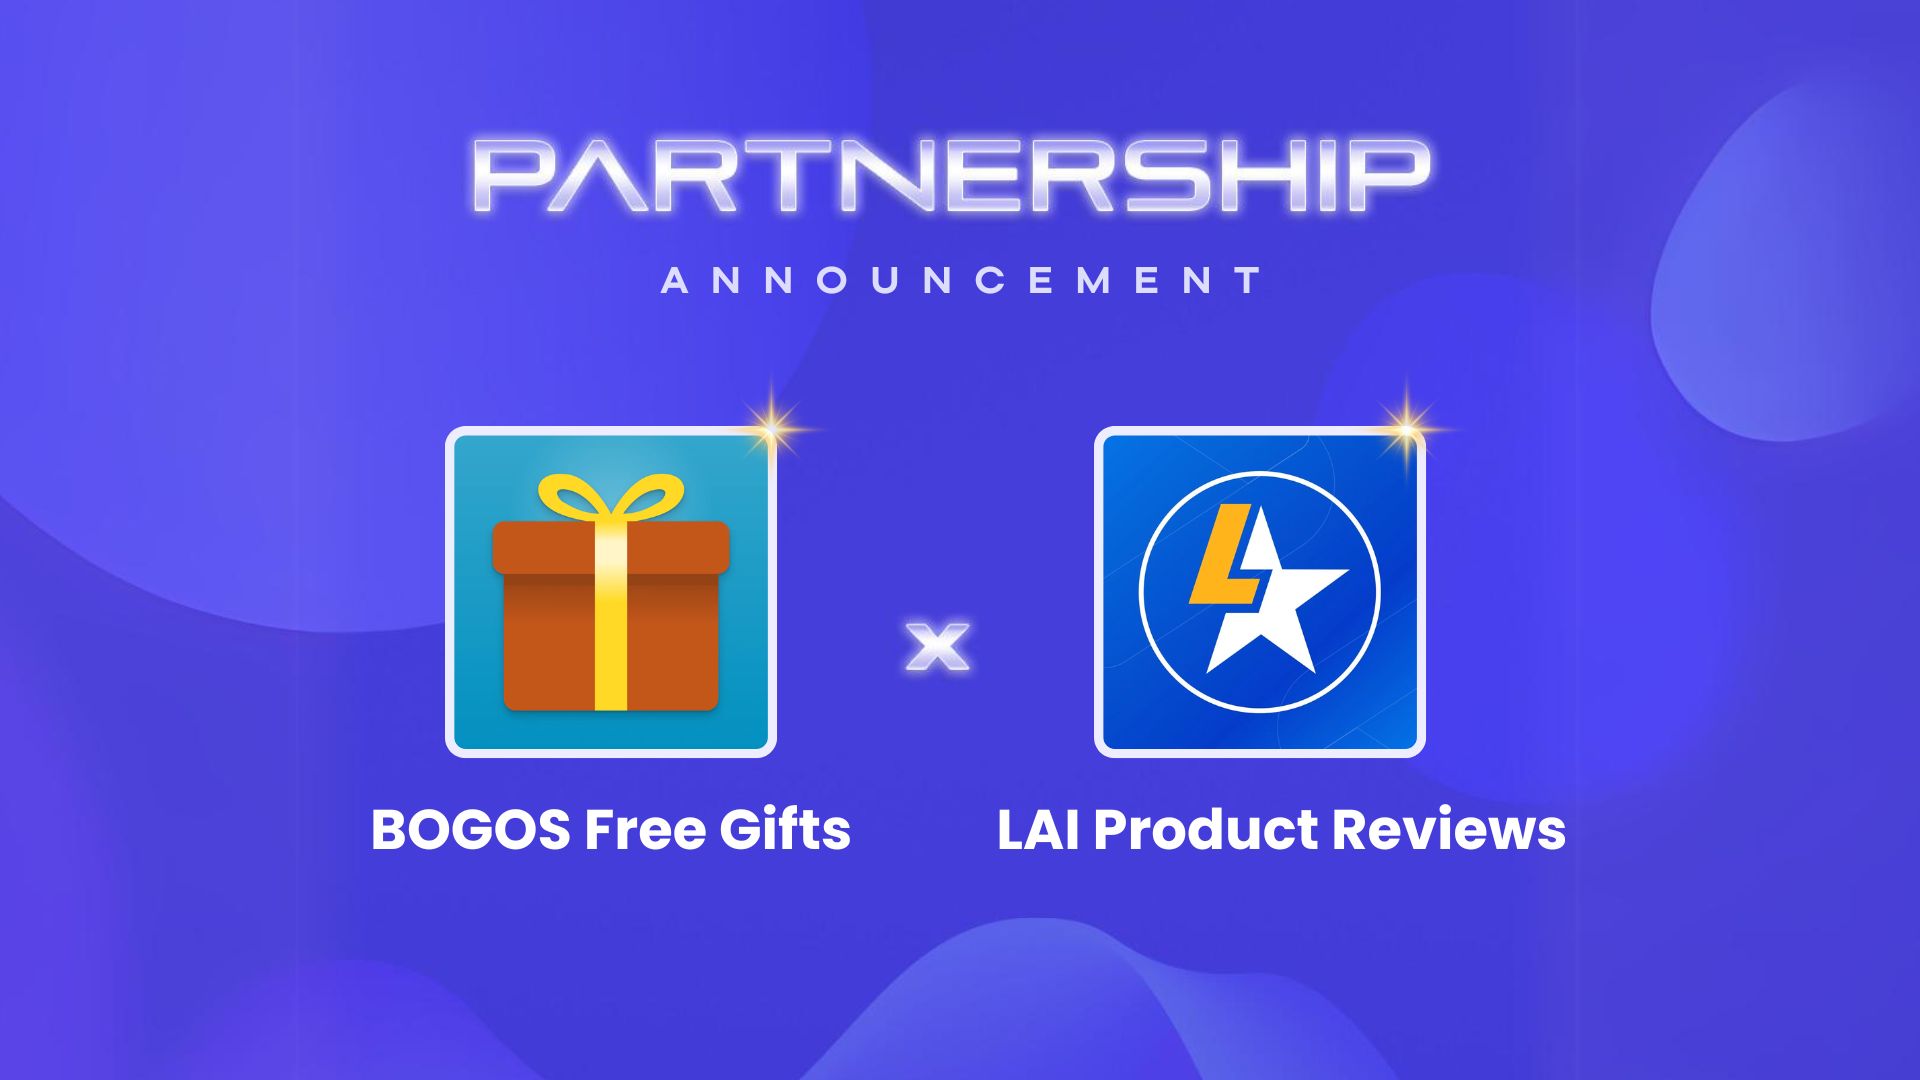 Introducing New Partner: LAI Product Reviews app